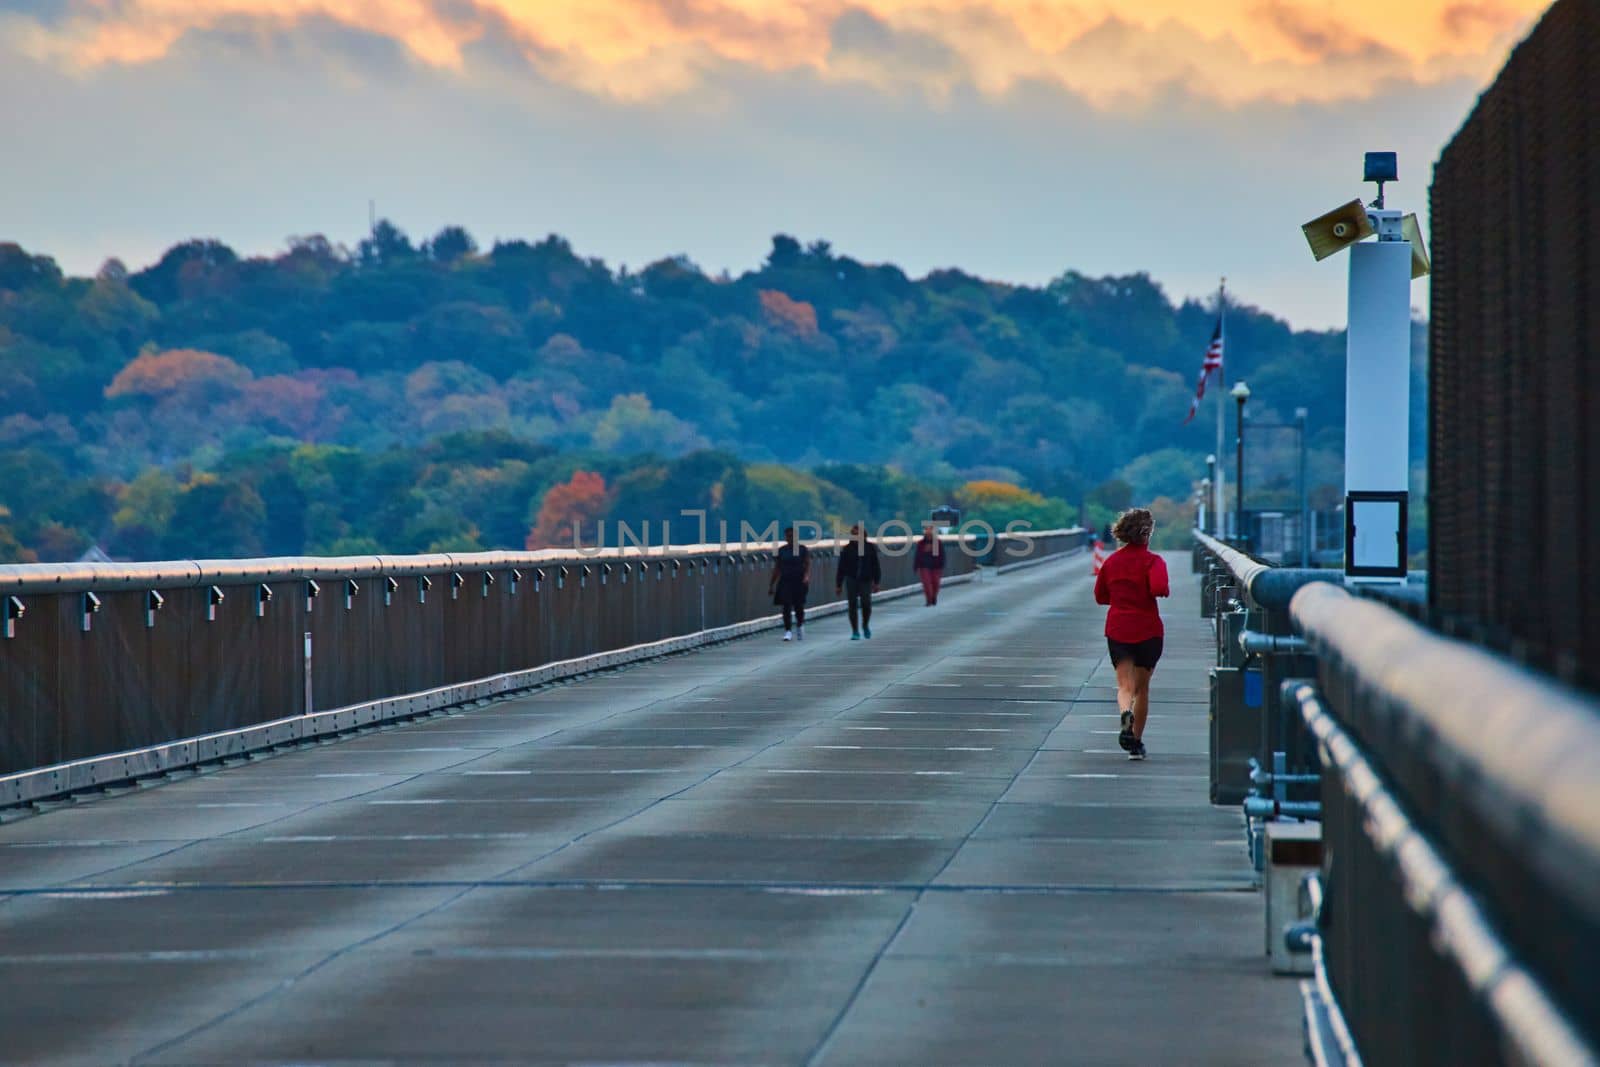 Joggers running along long cement bridge boardwalk with forests in background by njproductions